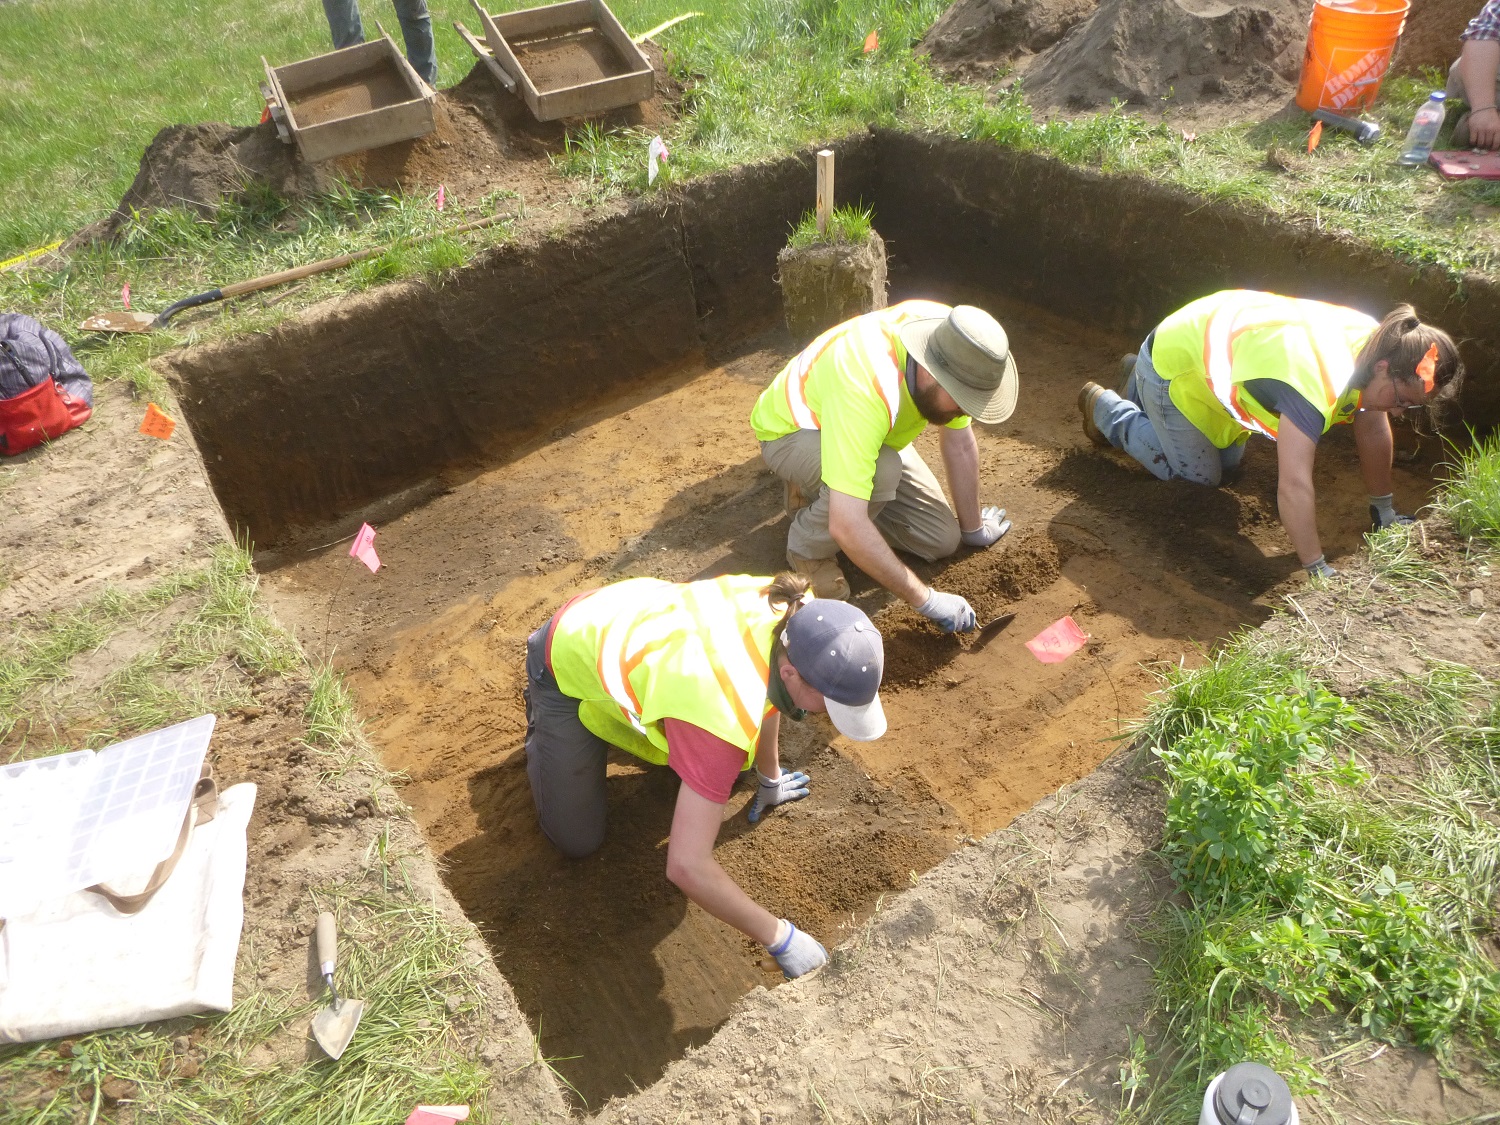 Three archaeologists use trowels to investigate the bottom of a Stage 4 excavation.